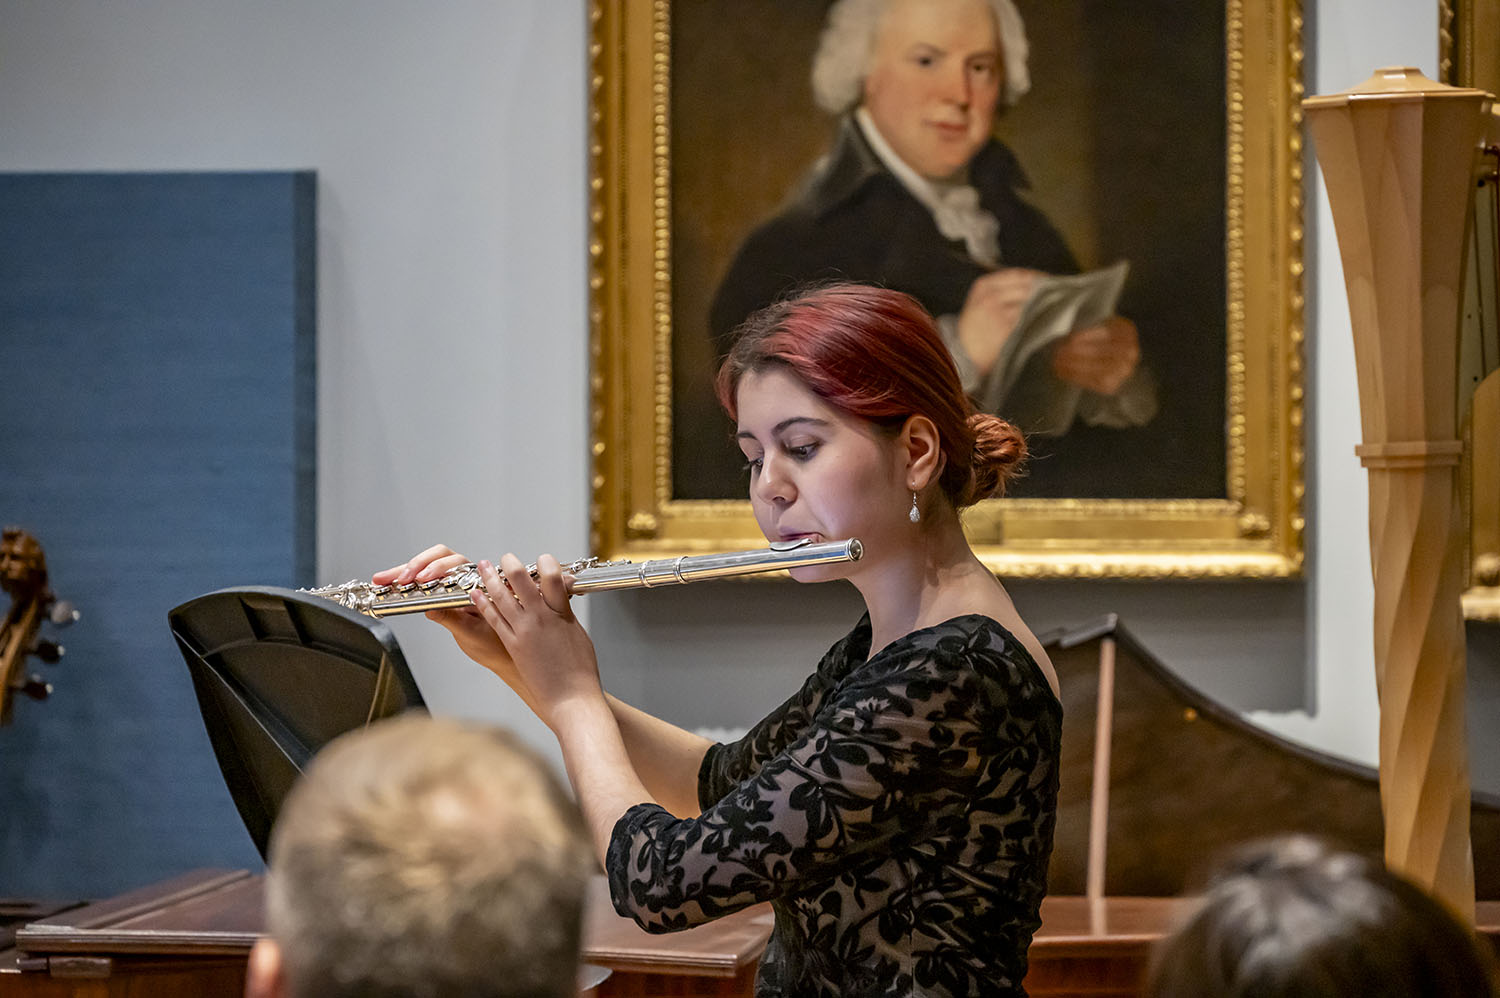 A flute player performing in the RCM Museum